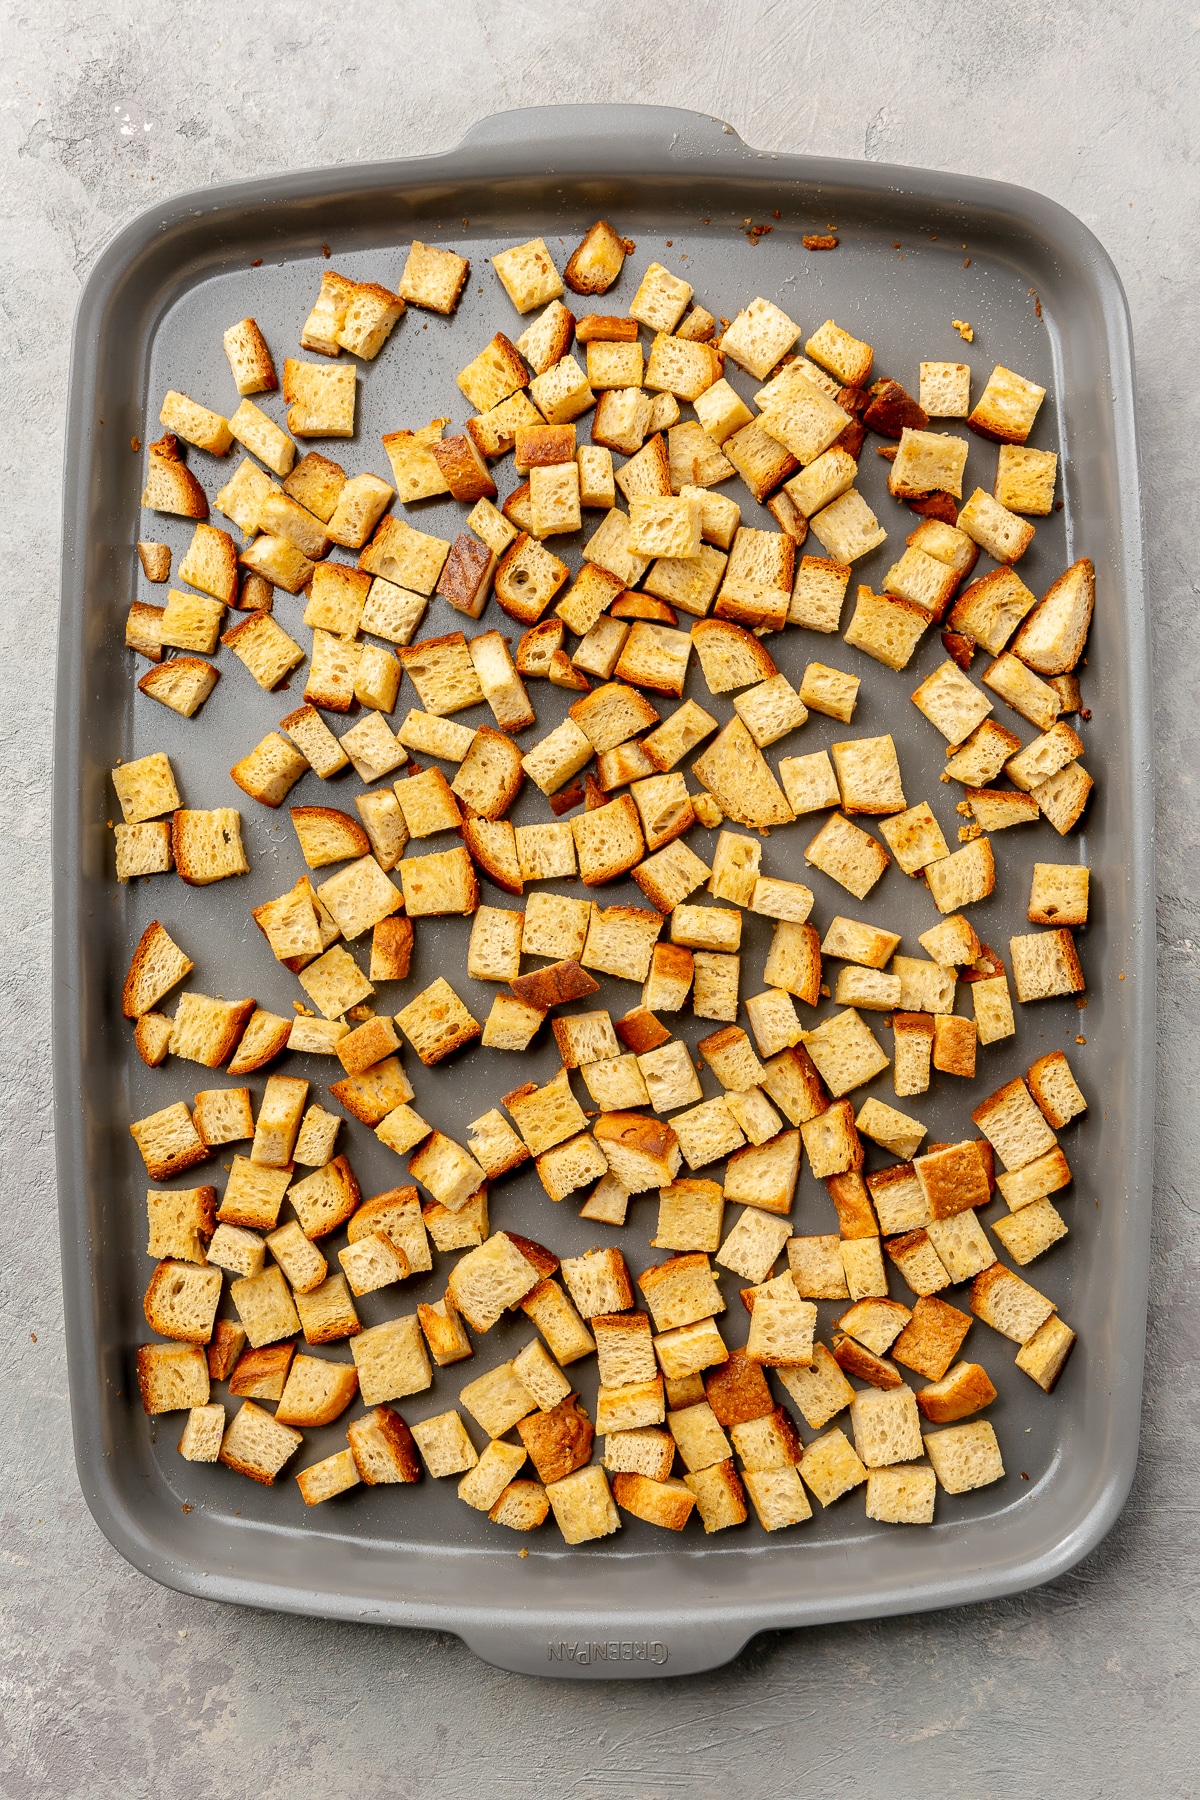 Toasted, lightly golden, pieces of cubed bread sit on a metal baking tray.